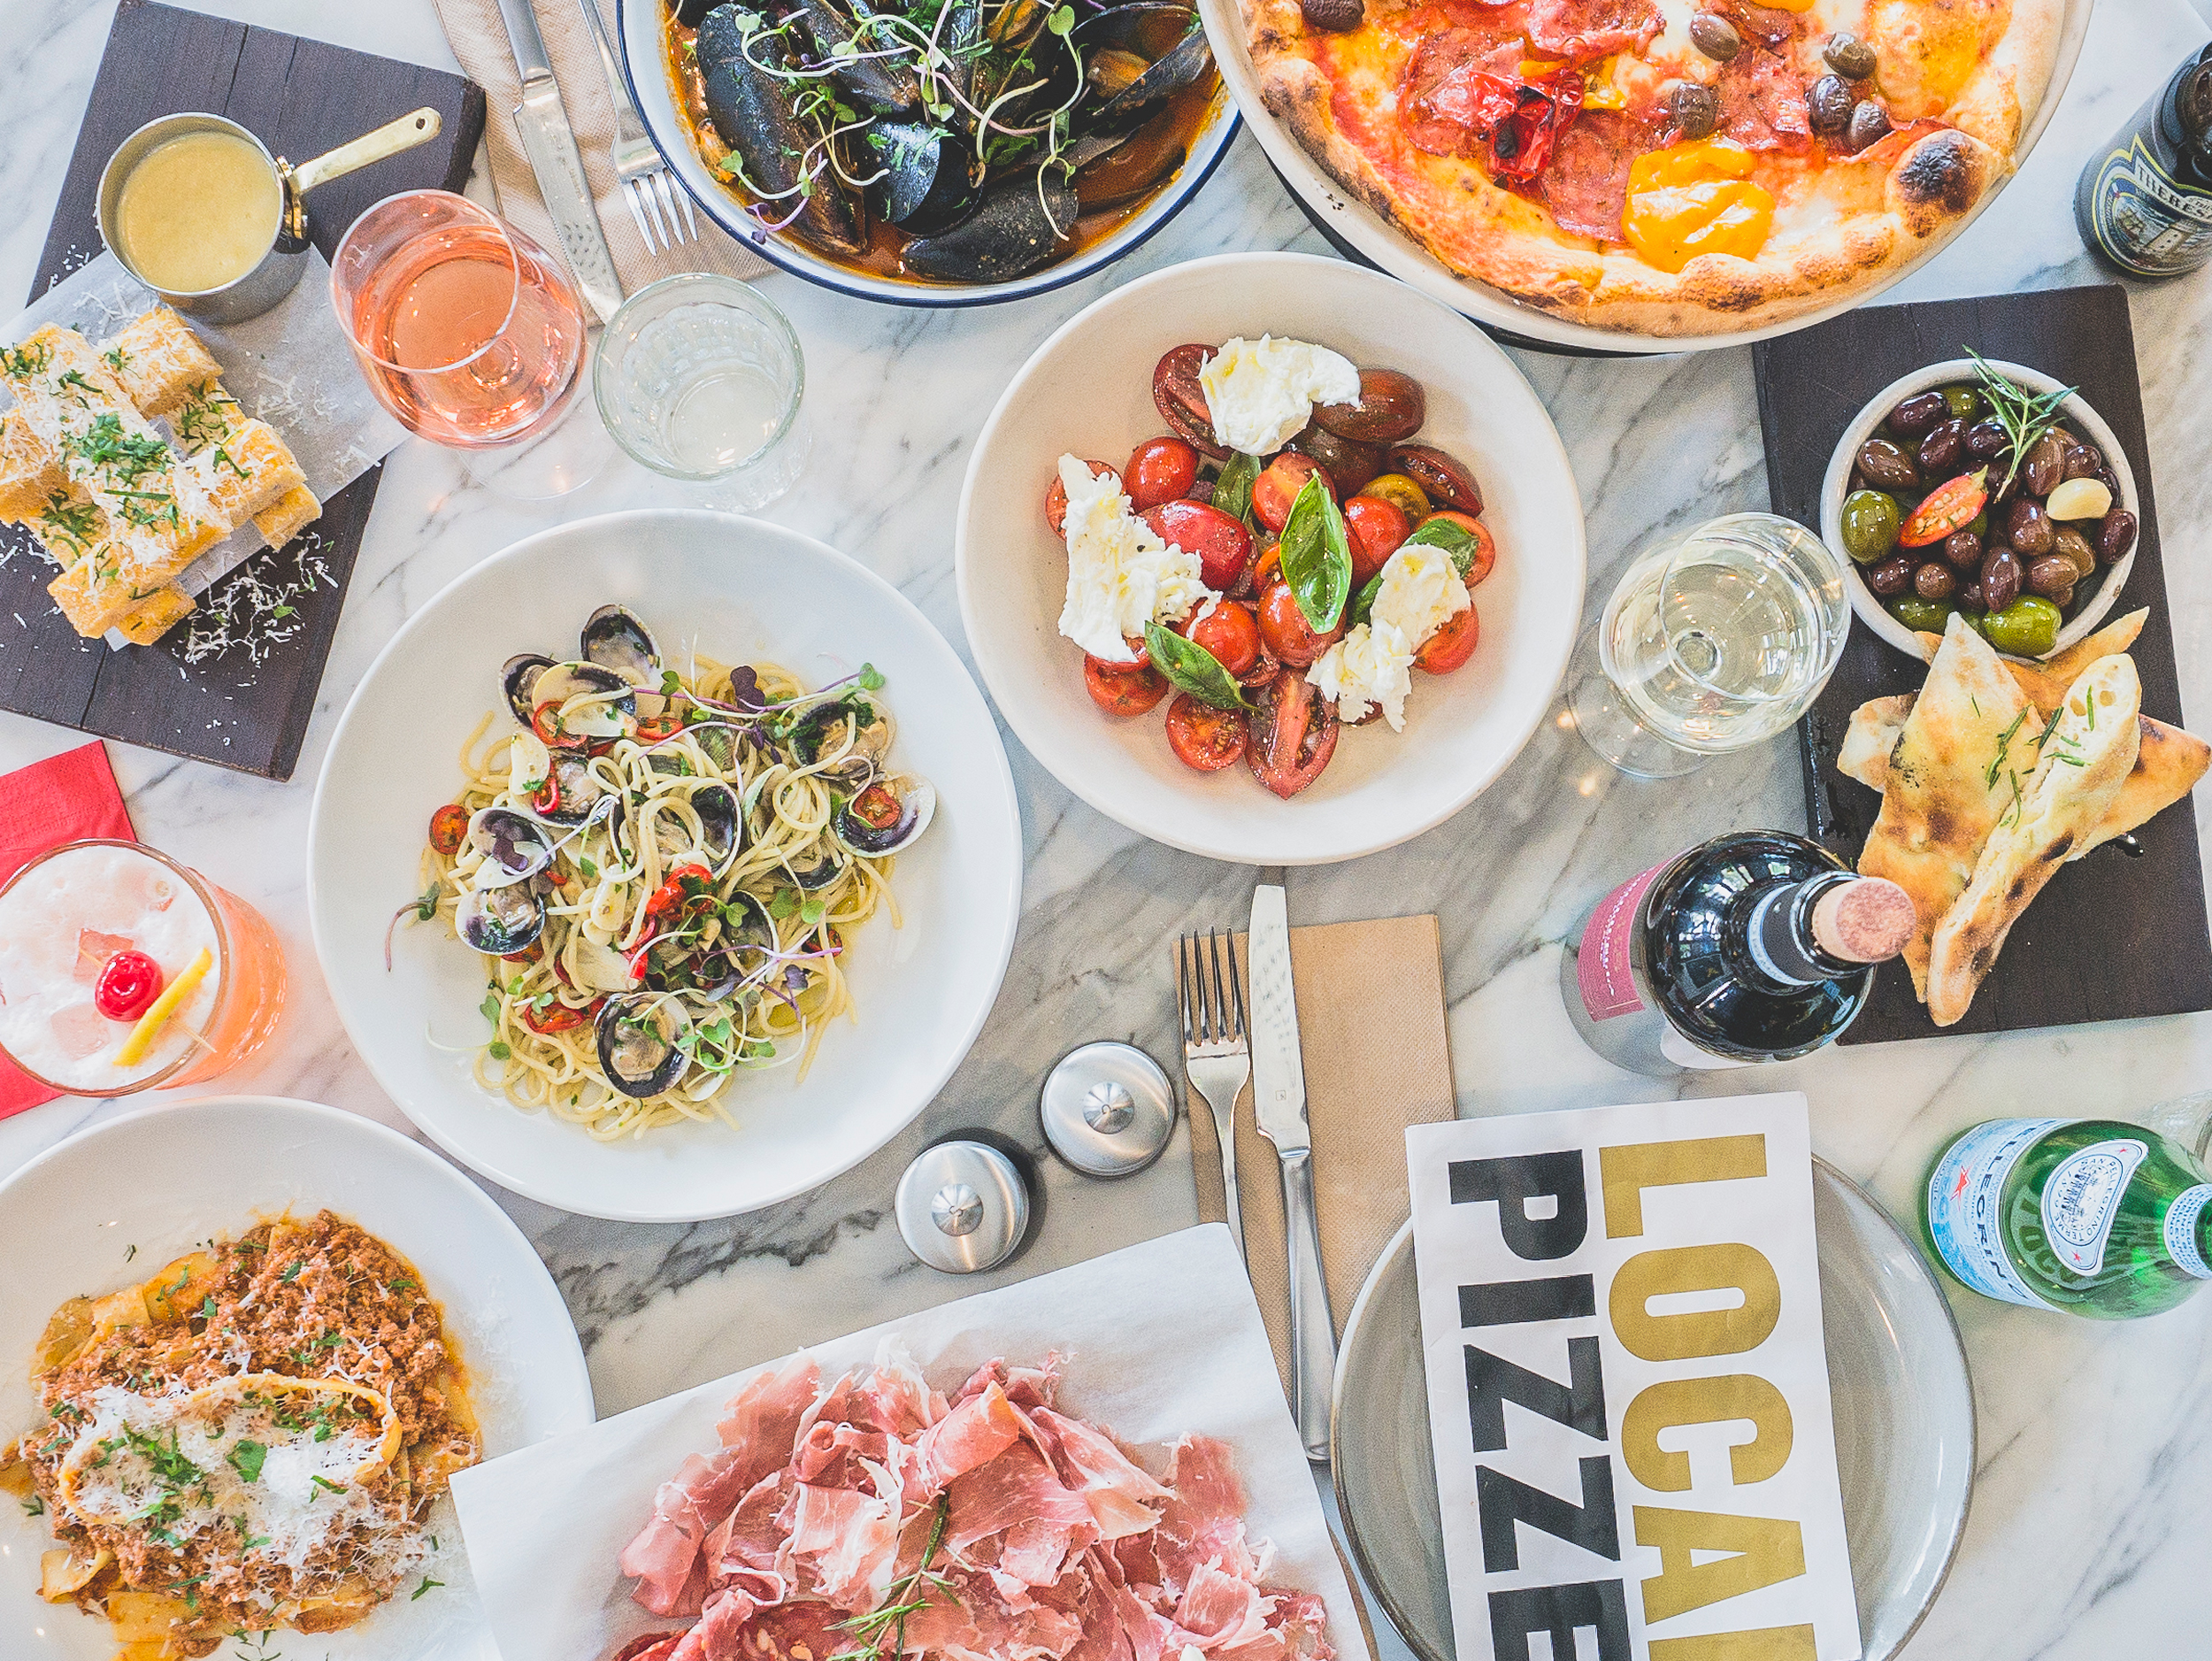 Let Locale Pizzeria whisk you to the streets of Italy